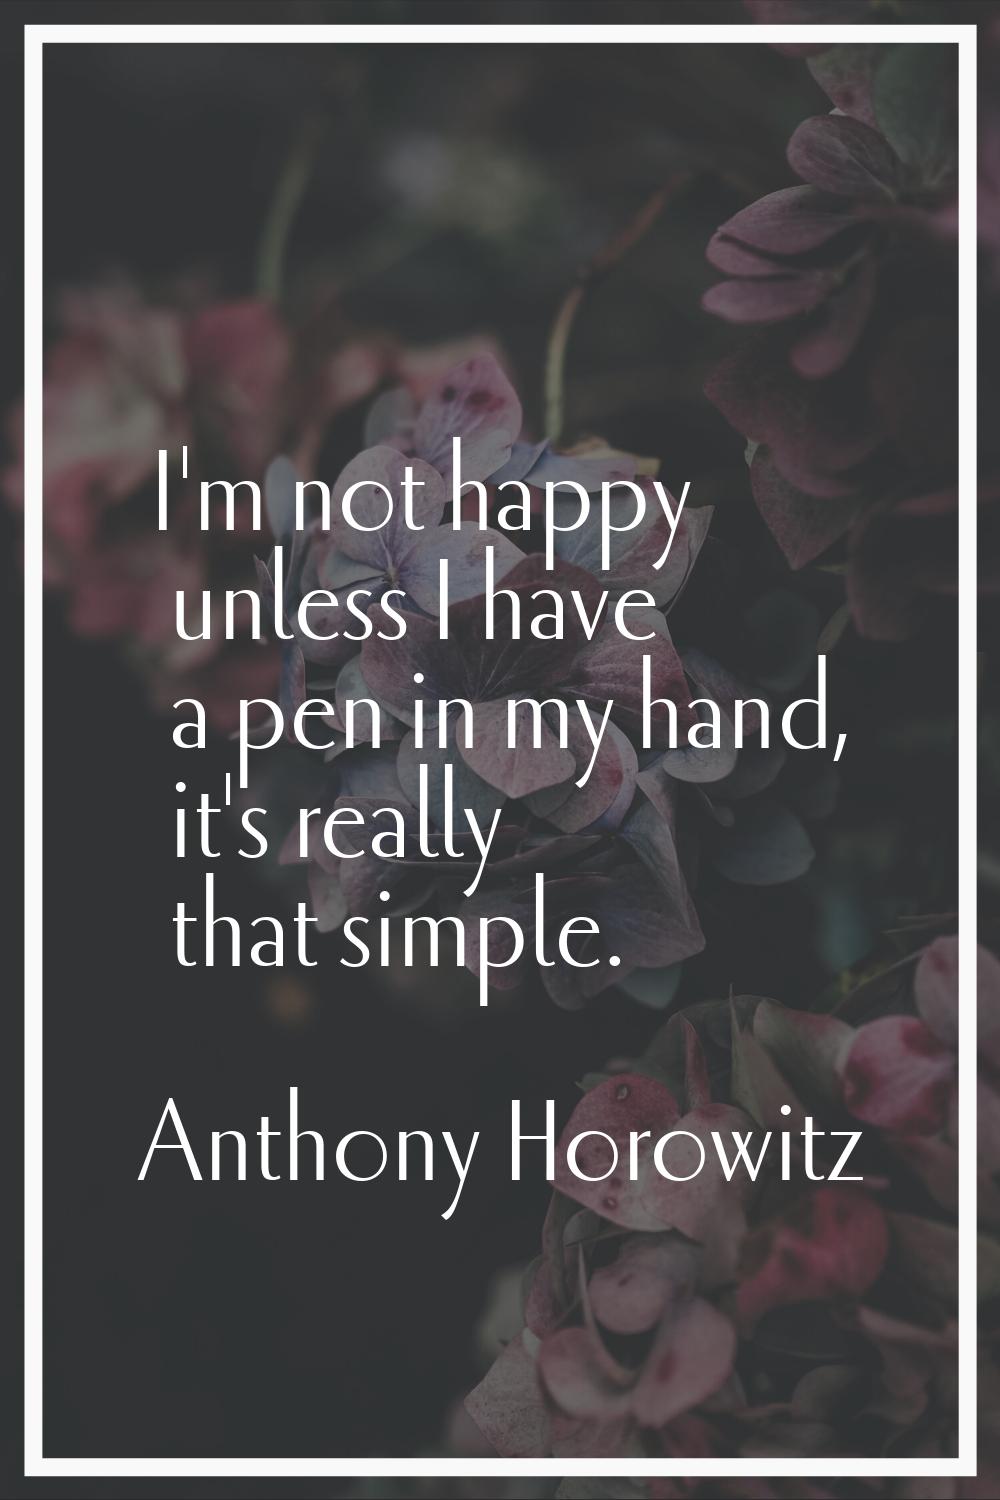 I'm not happy unless I have a pen in my hand, it's really that simple.